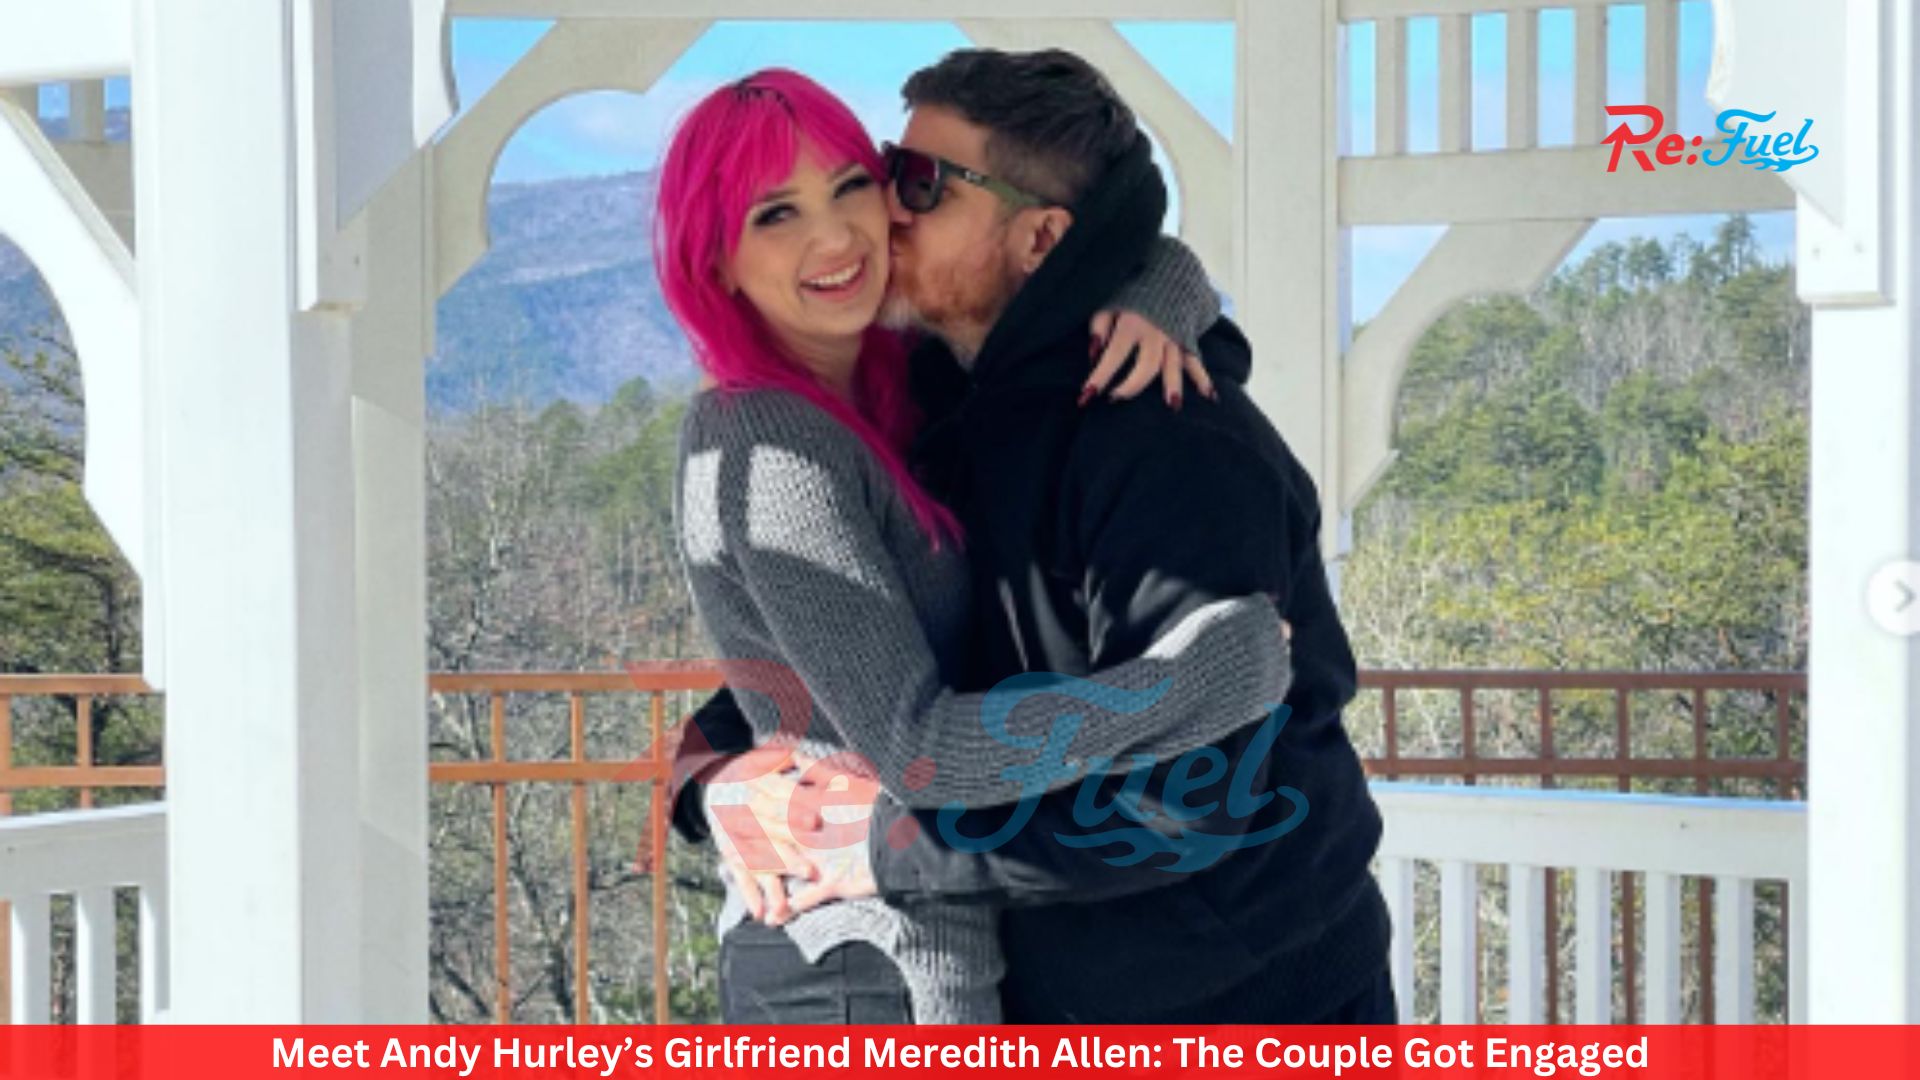 Meet Andy Hurley’s Girlfriend Meredith Allen: The Couple Got Engaged